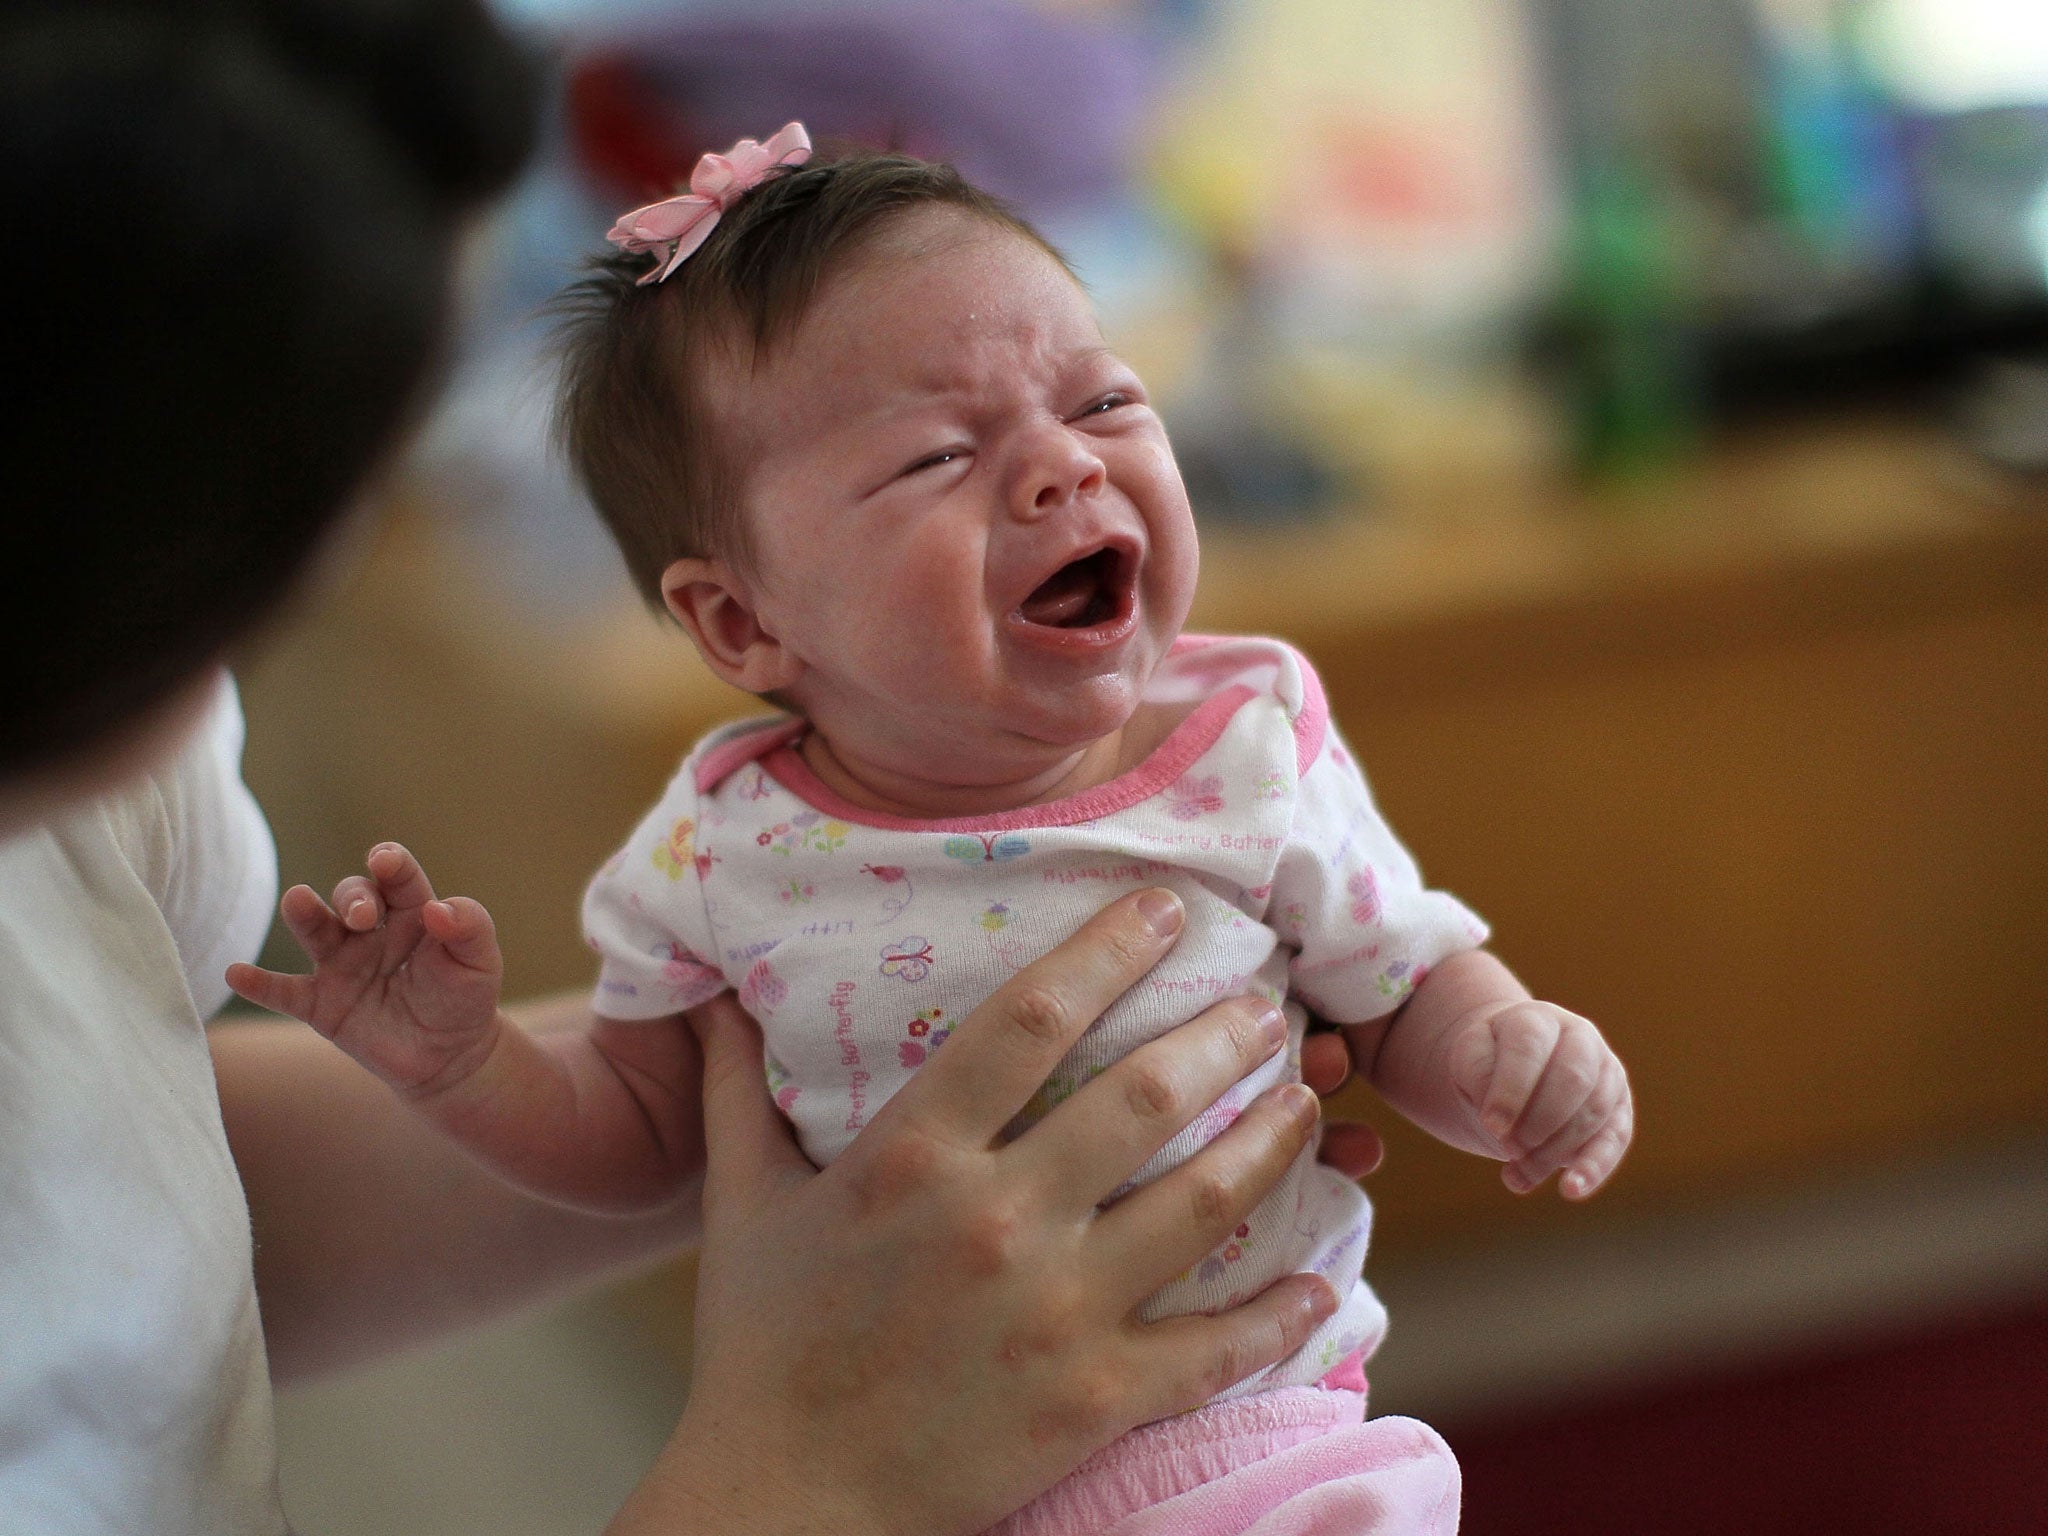 Six-week-old Lillian is held by her mother in the common area of their ward at Decatur Correctional Center February 18, 2011 in Decatur, Illinois.